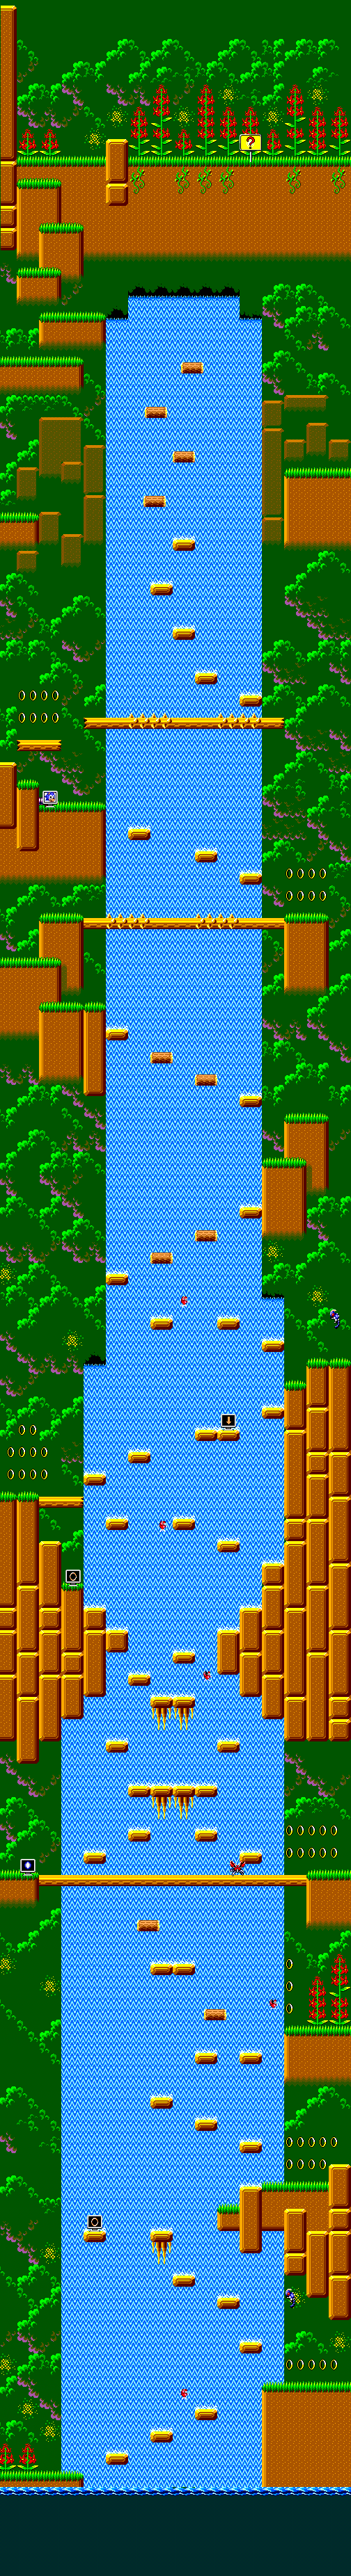 Sonic the Hedgehog - Jungle Zone Act 2.png